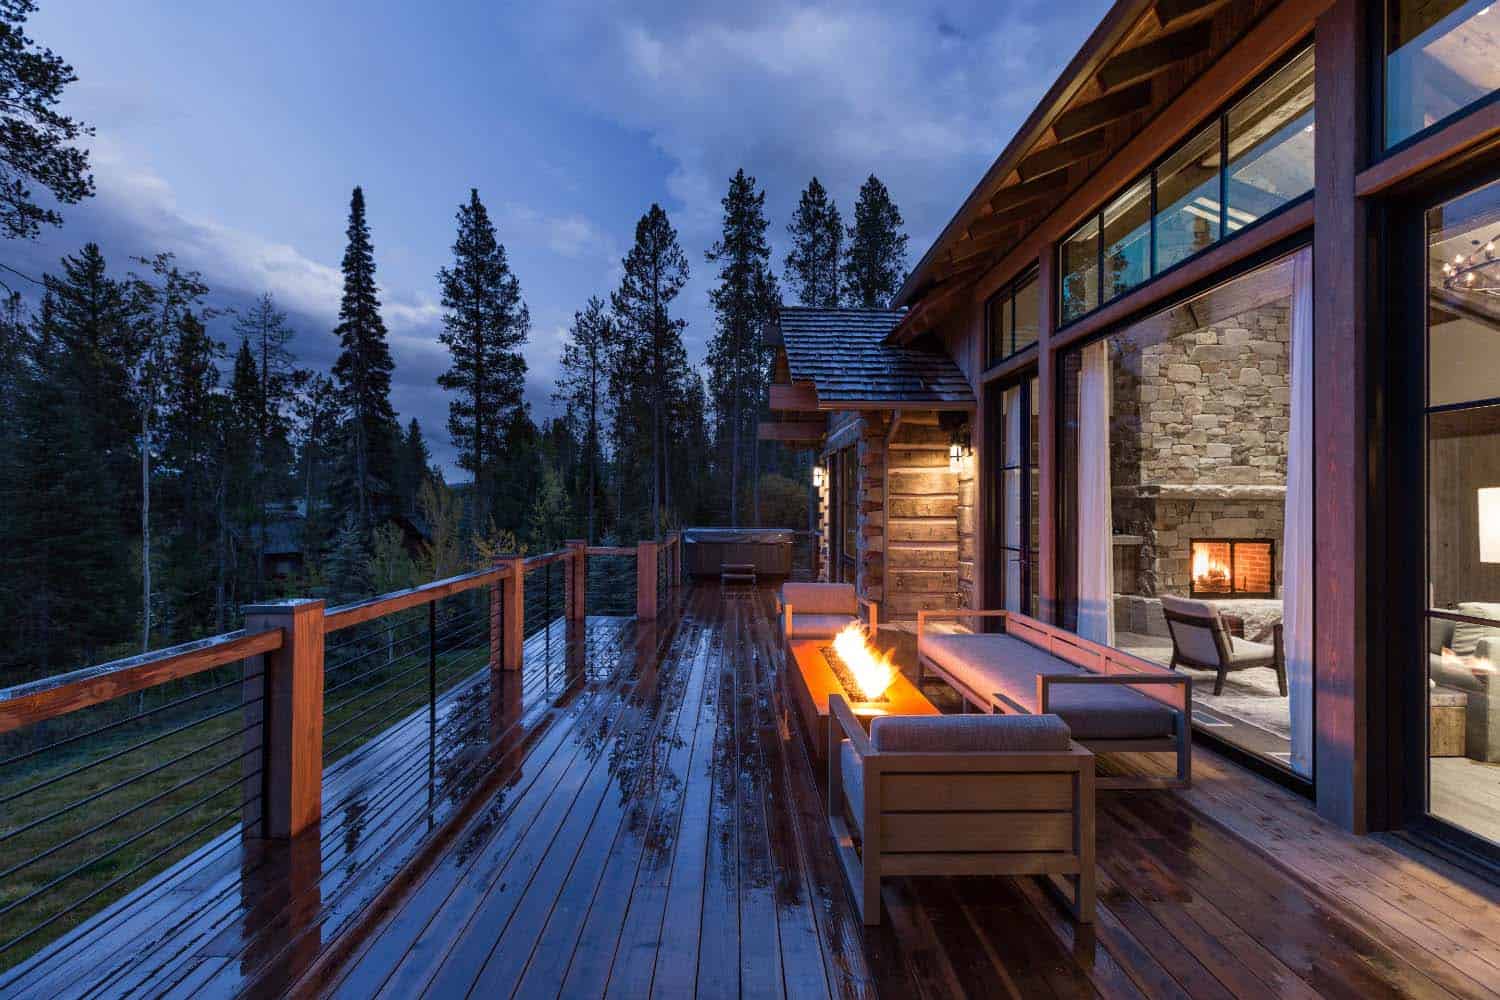 mountain modern cabin retreat deck with a fire pit at dusk